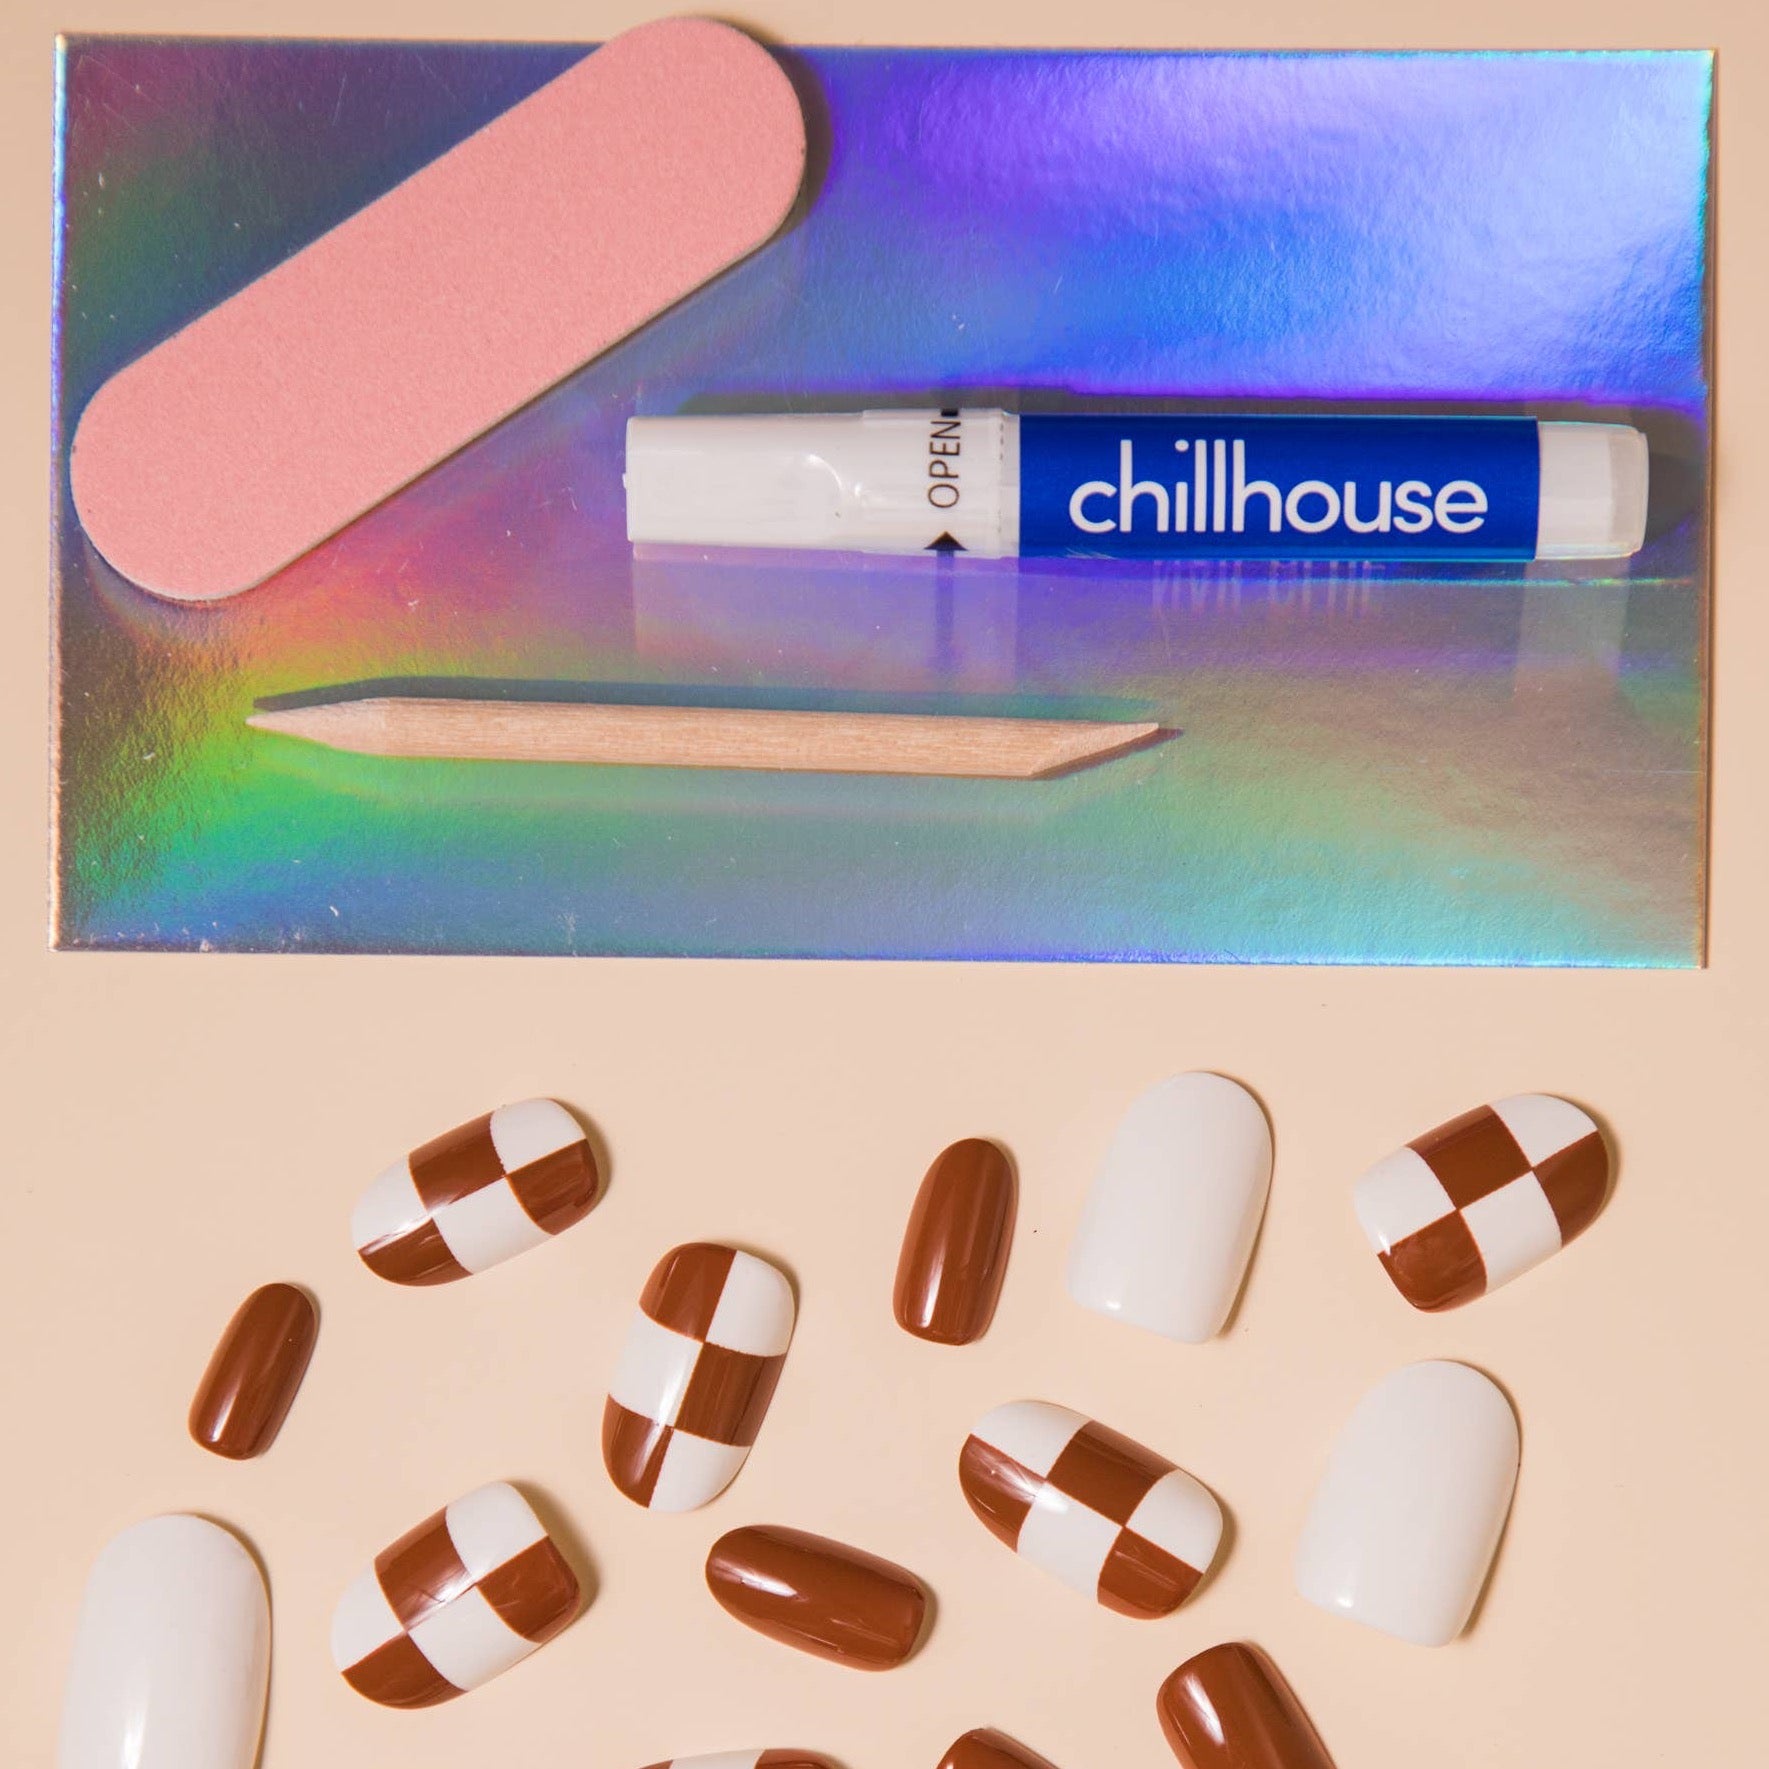 Chill Tips - Want S'more by Chillhouse